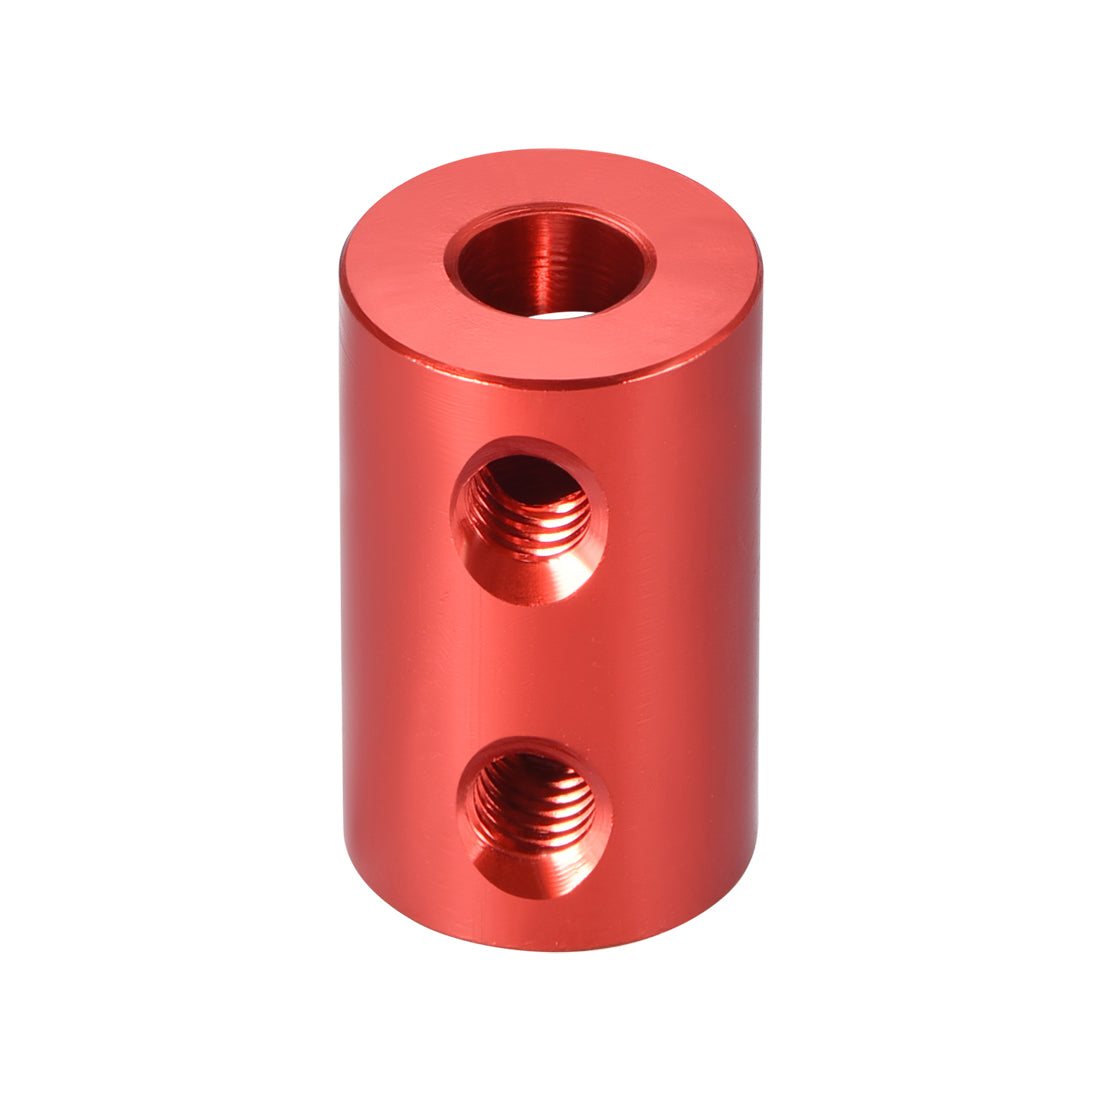 uxcell Uxcell Shaft Coupling 5mm to 5mm Bore L20xD12 Robot Motor Wheel Rigid  Connector Red